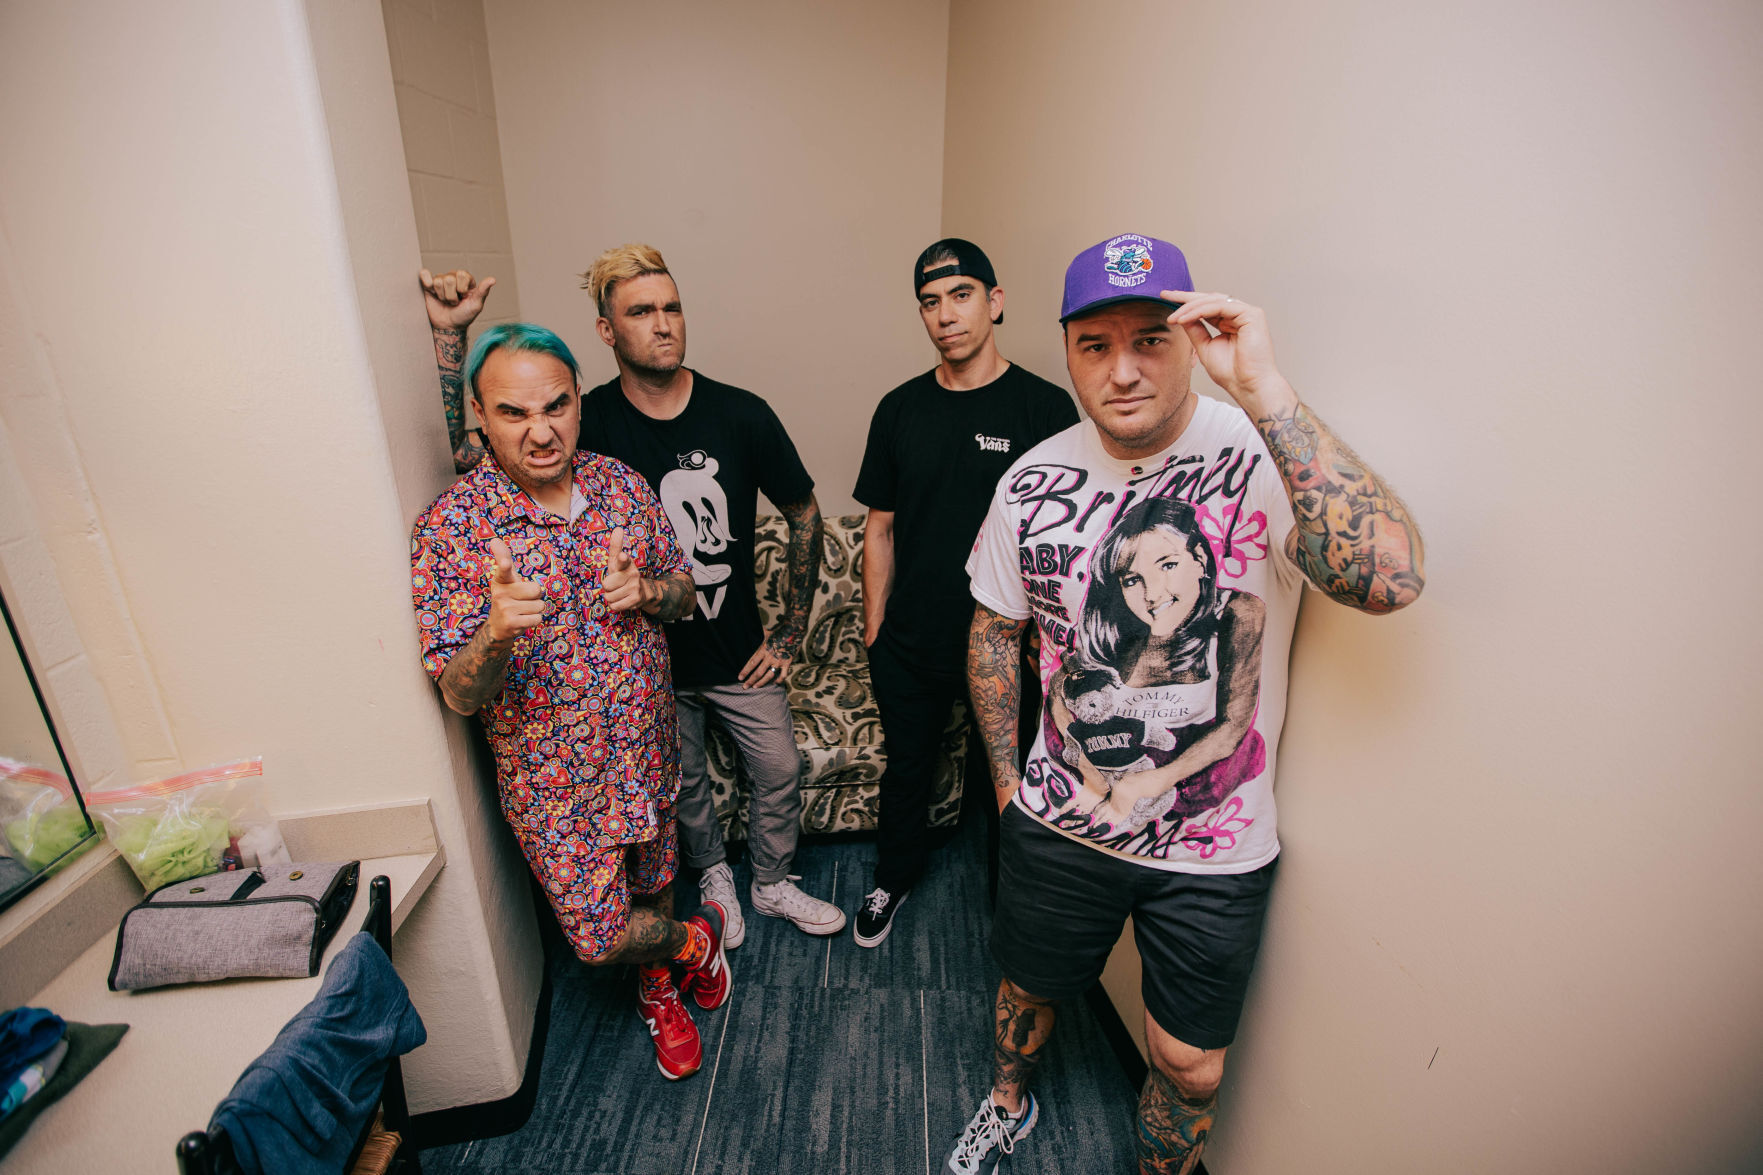 New Found Glory celebrating '20 Years of Sticks and Stones' at Red